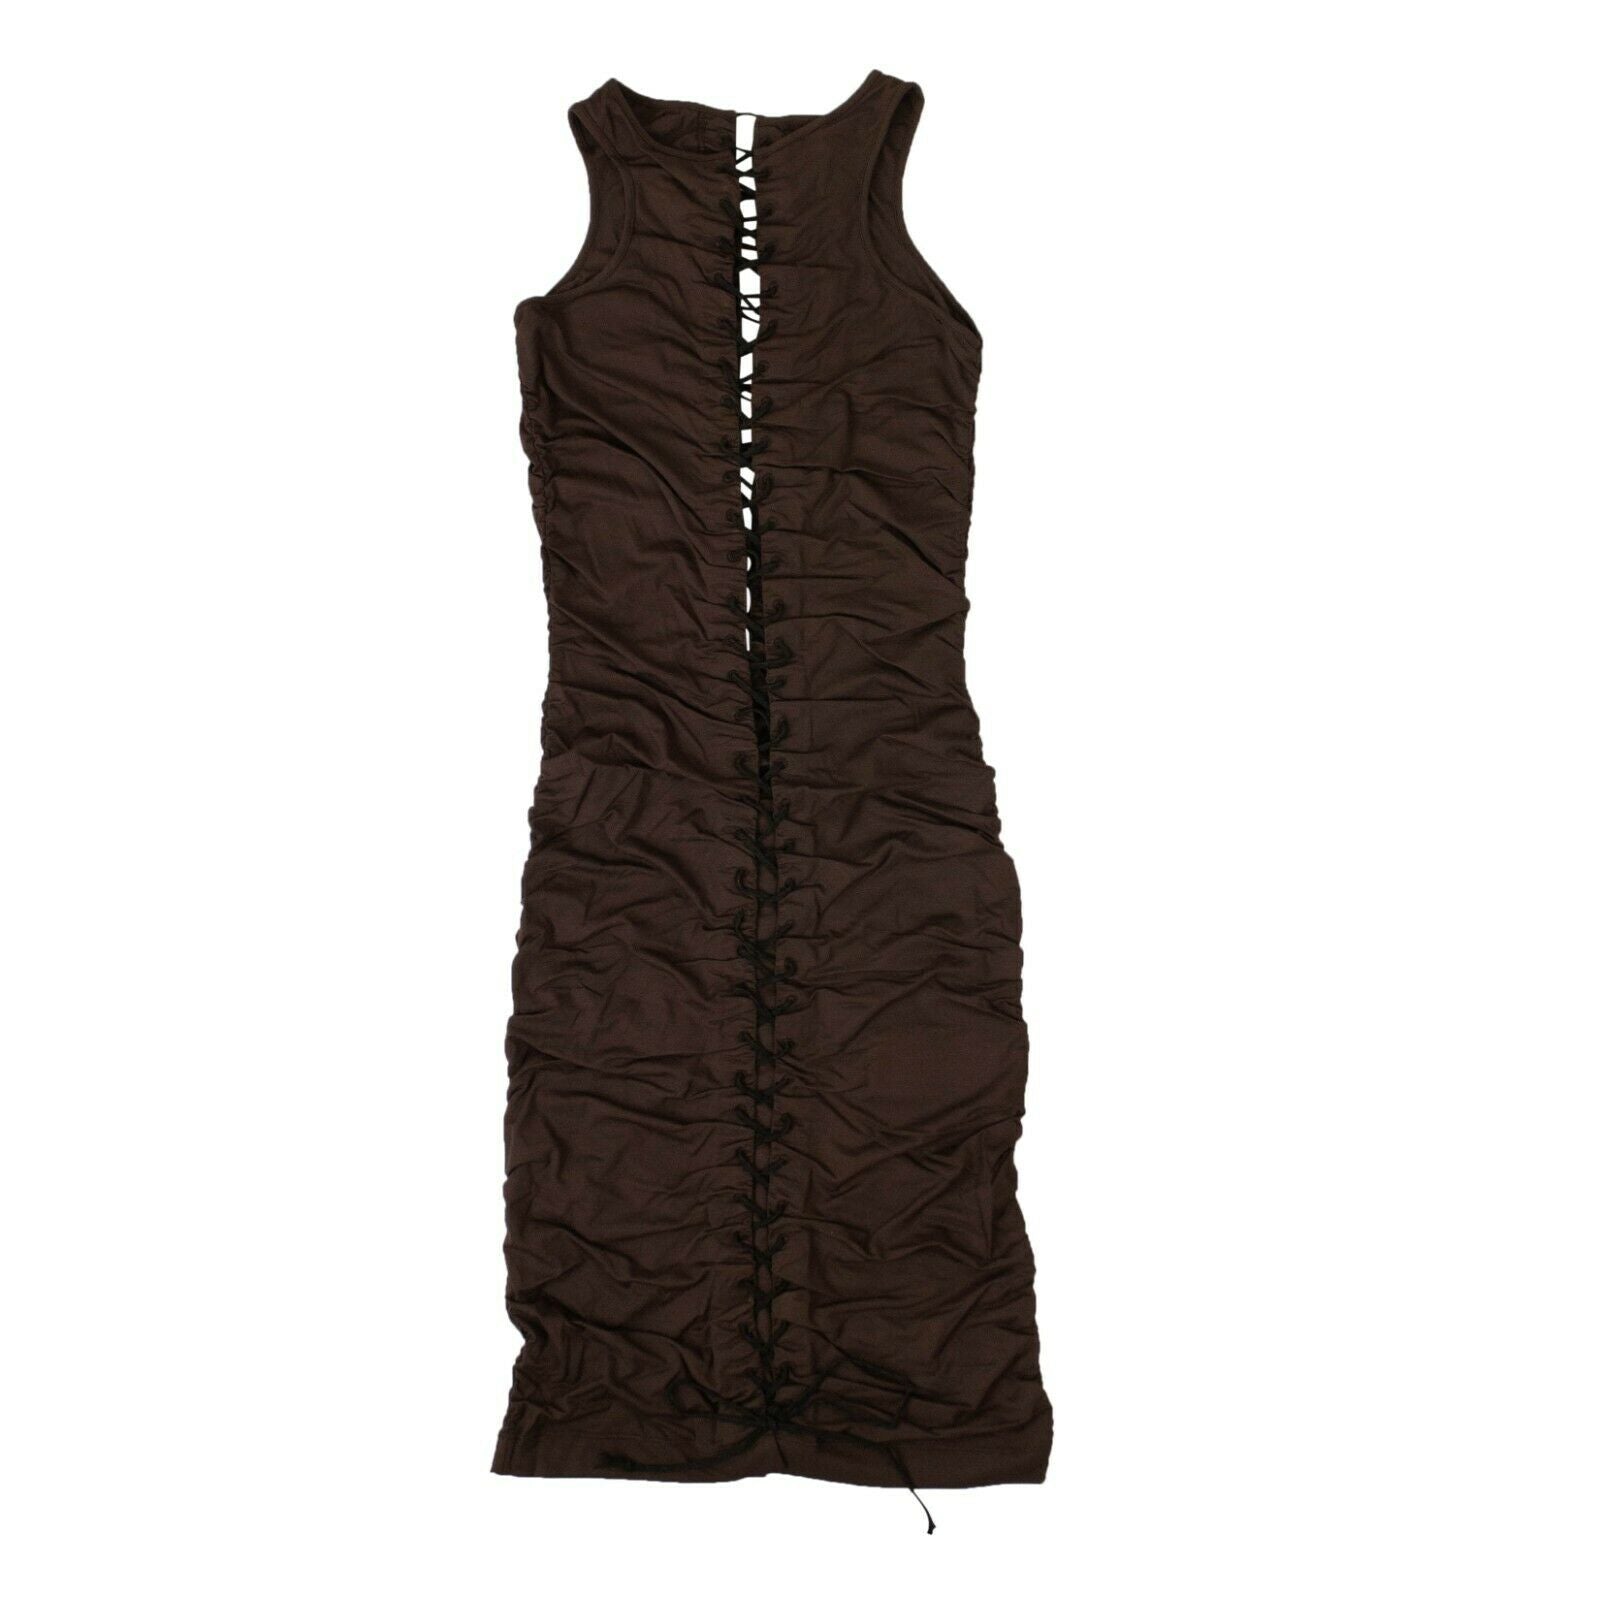 Ben Taverniti Unravel Project Gathered Lace Up Dress - Brown